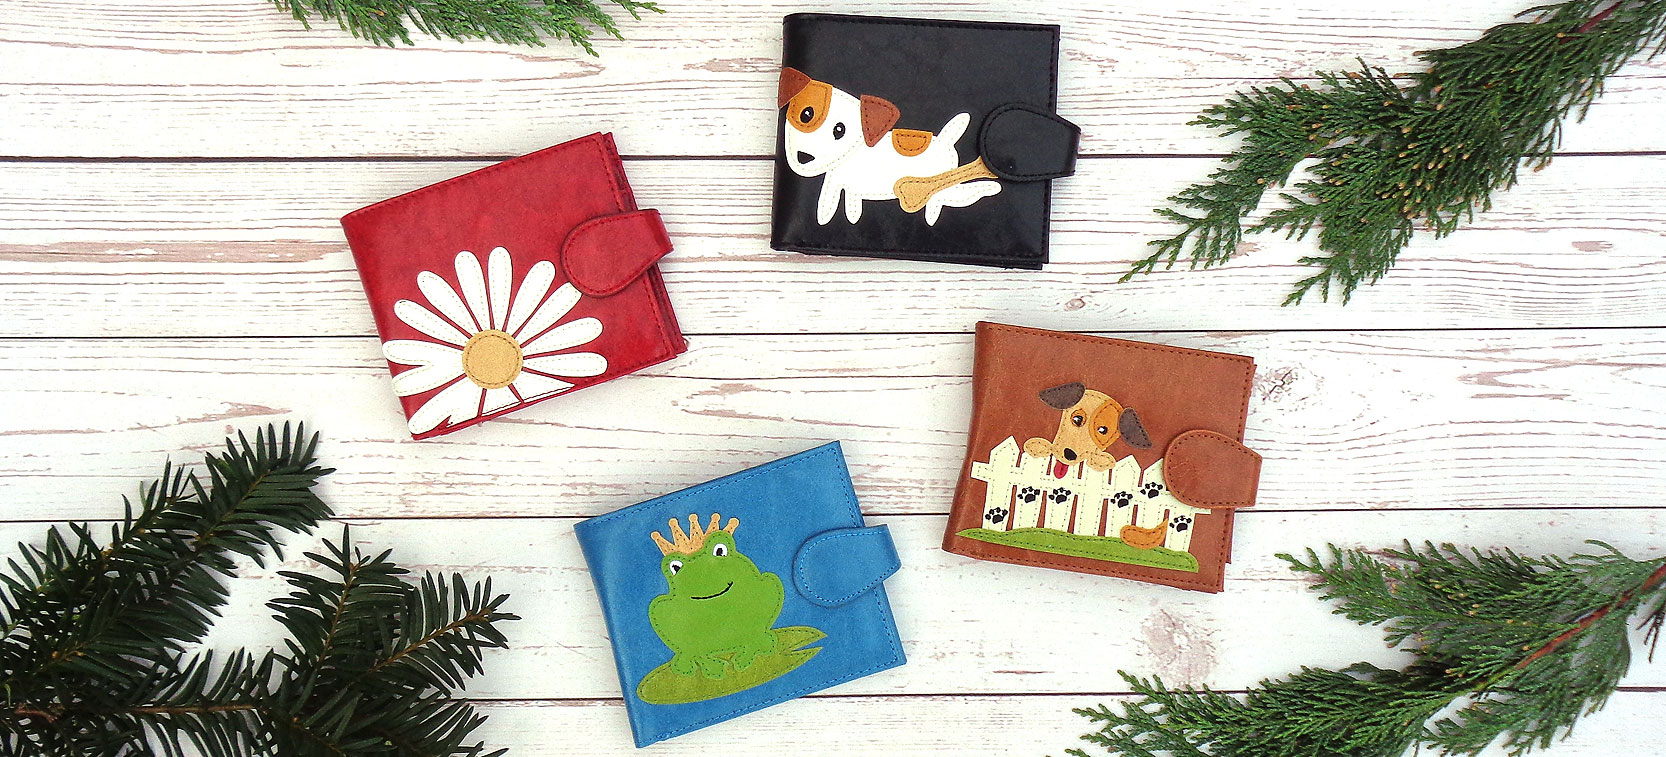 LAVISHY design & wholesale vegan applique medium wallets to gift shops, boutiques & book stores in Canada, USA & worldwide.